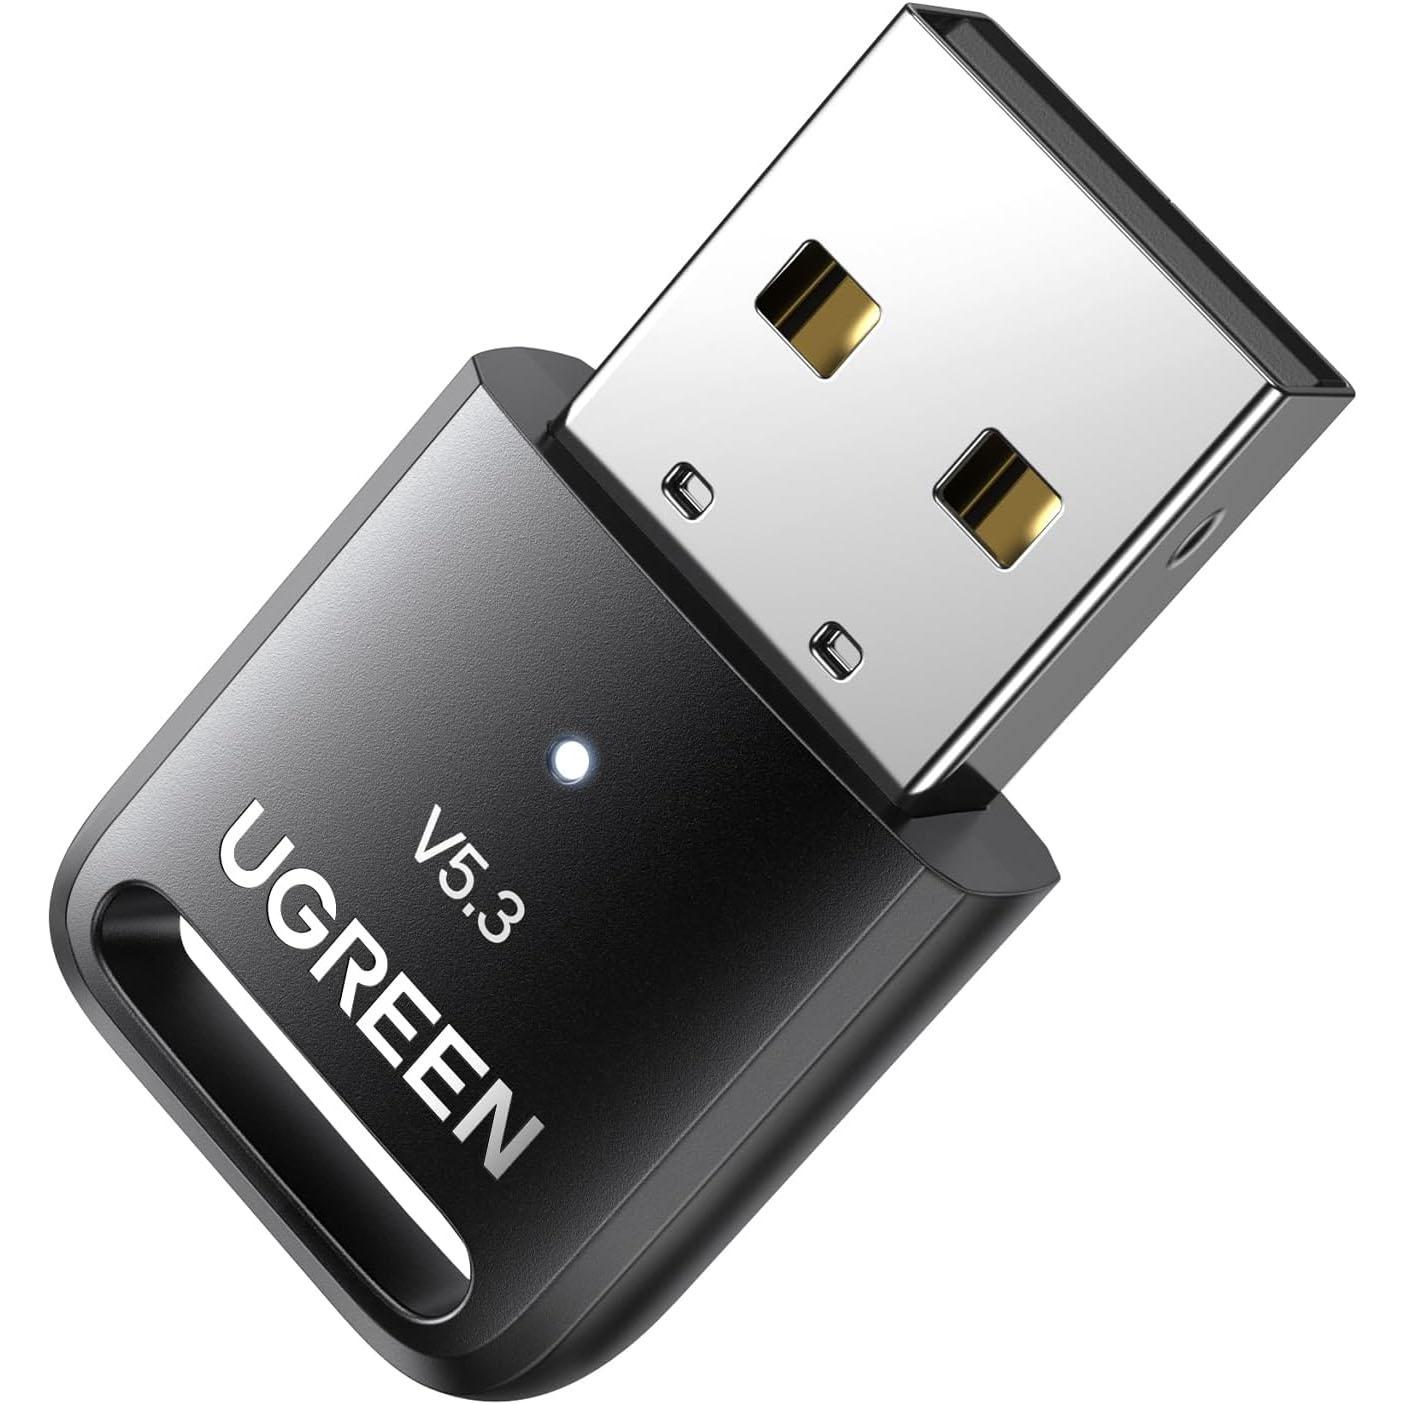 UGreen Bluetooth 5.3 Dongle PC Adapter for $6.99 Shipped